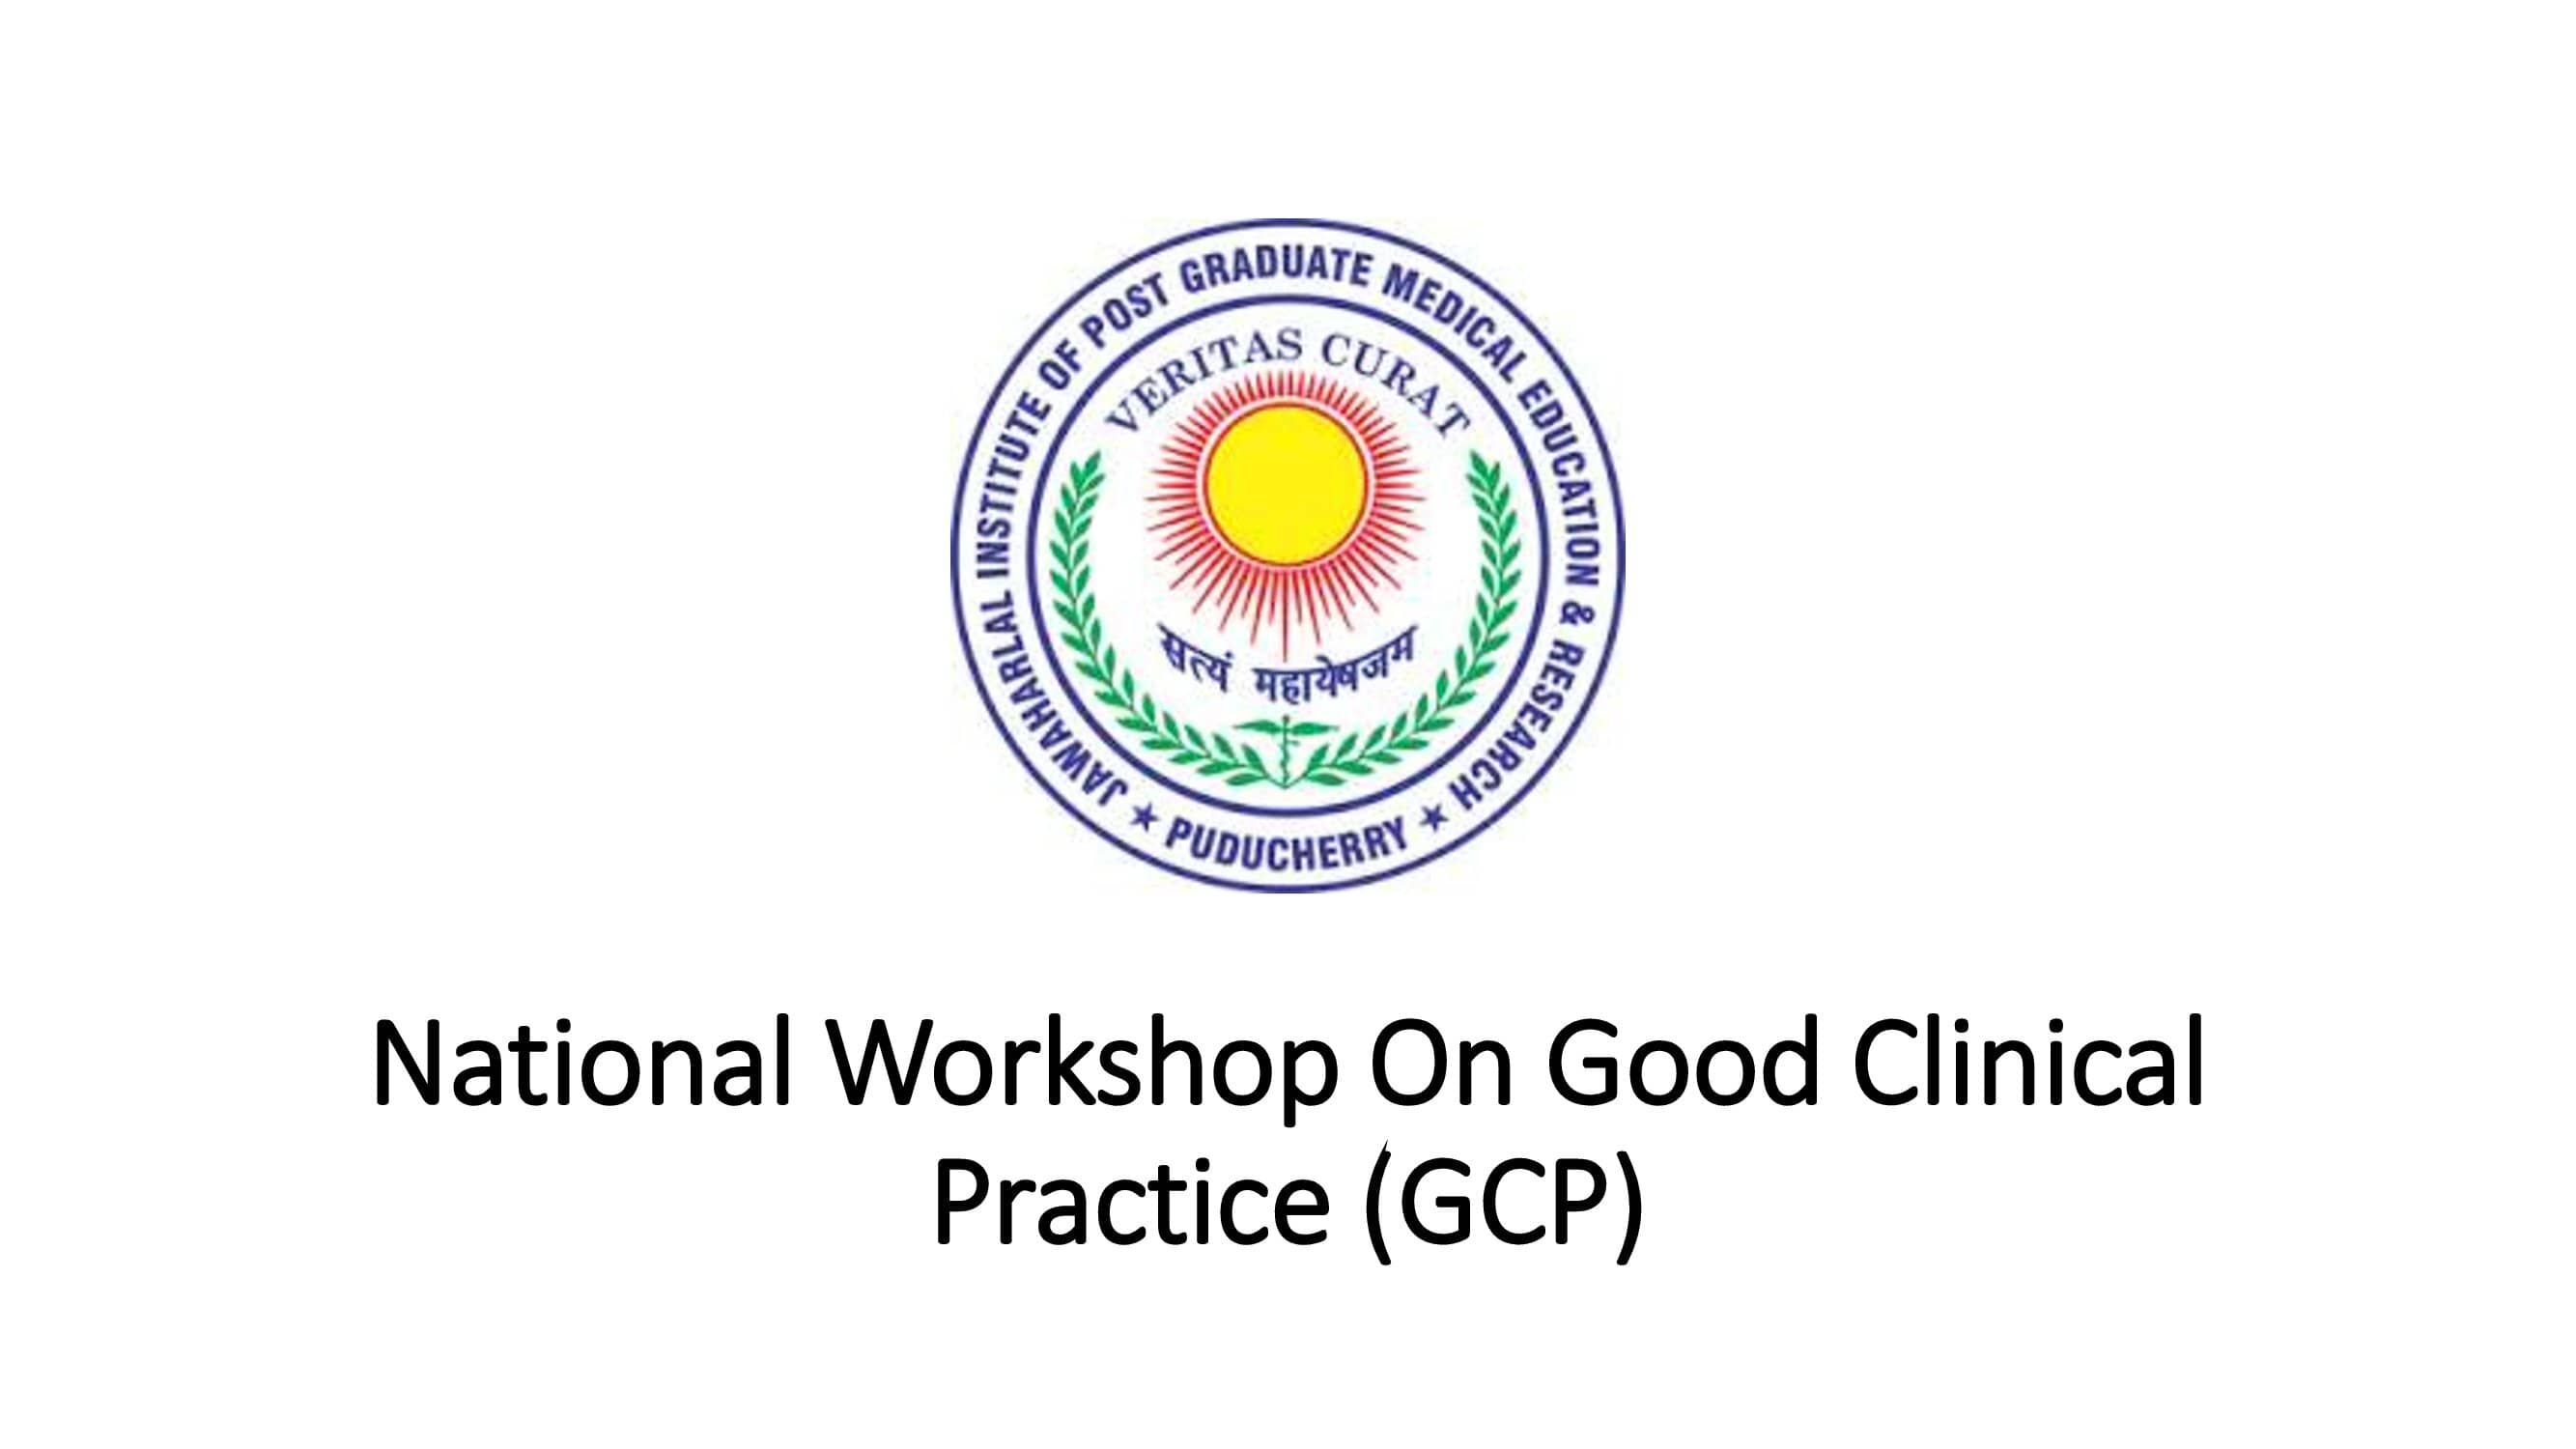 National Workshop On Good Clinical Practice (GCP)